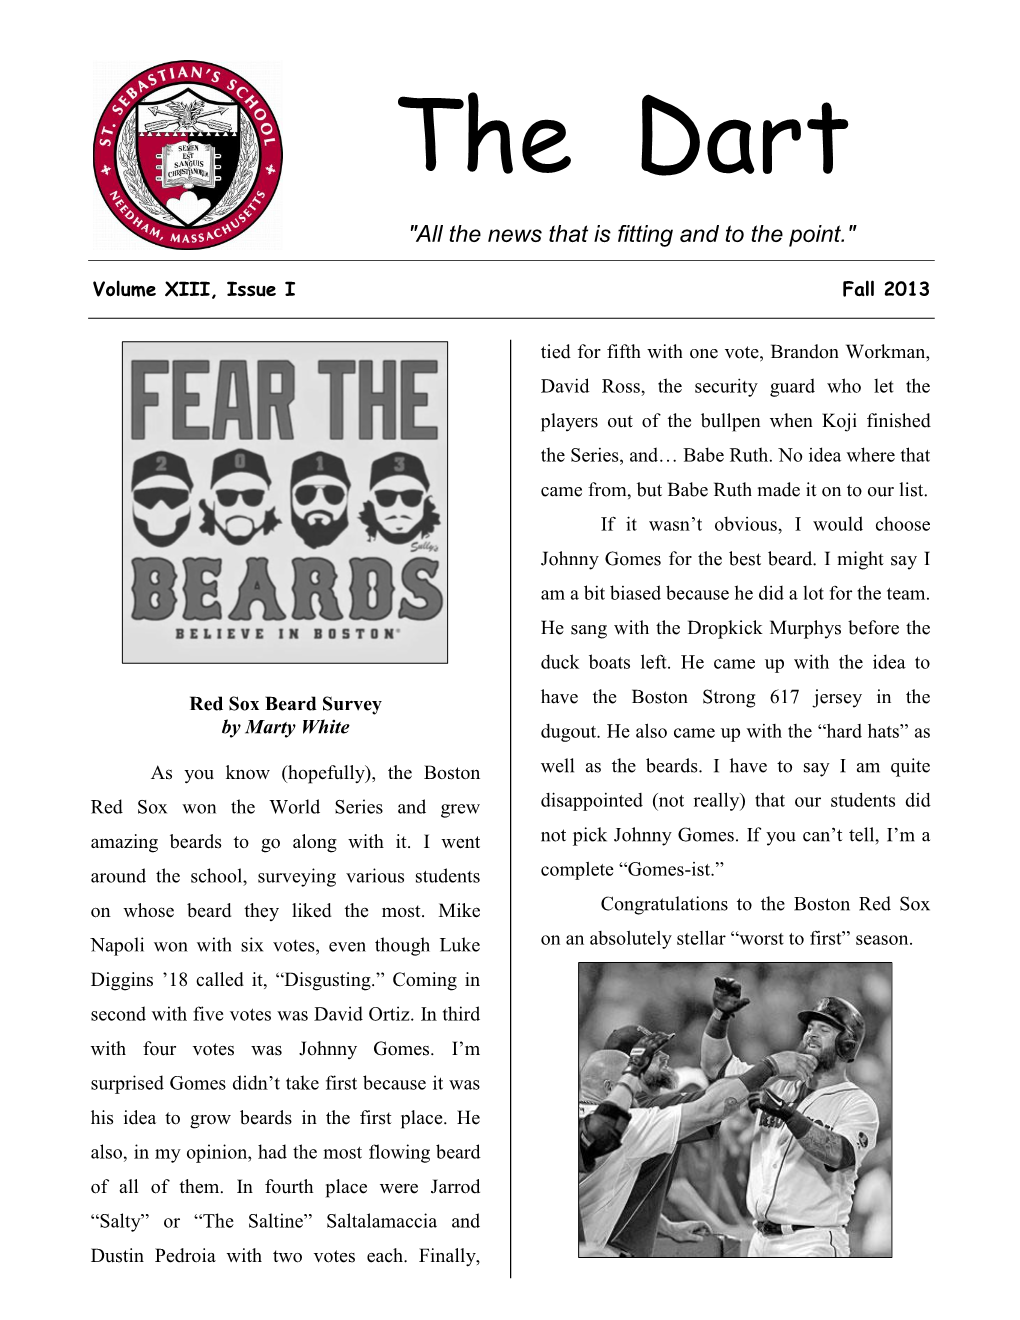 The Dart "All the News That Is Fitting and to the Point." Volume XIII, Issue I Fall 2013